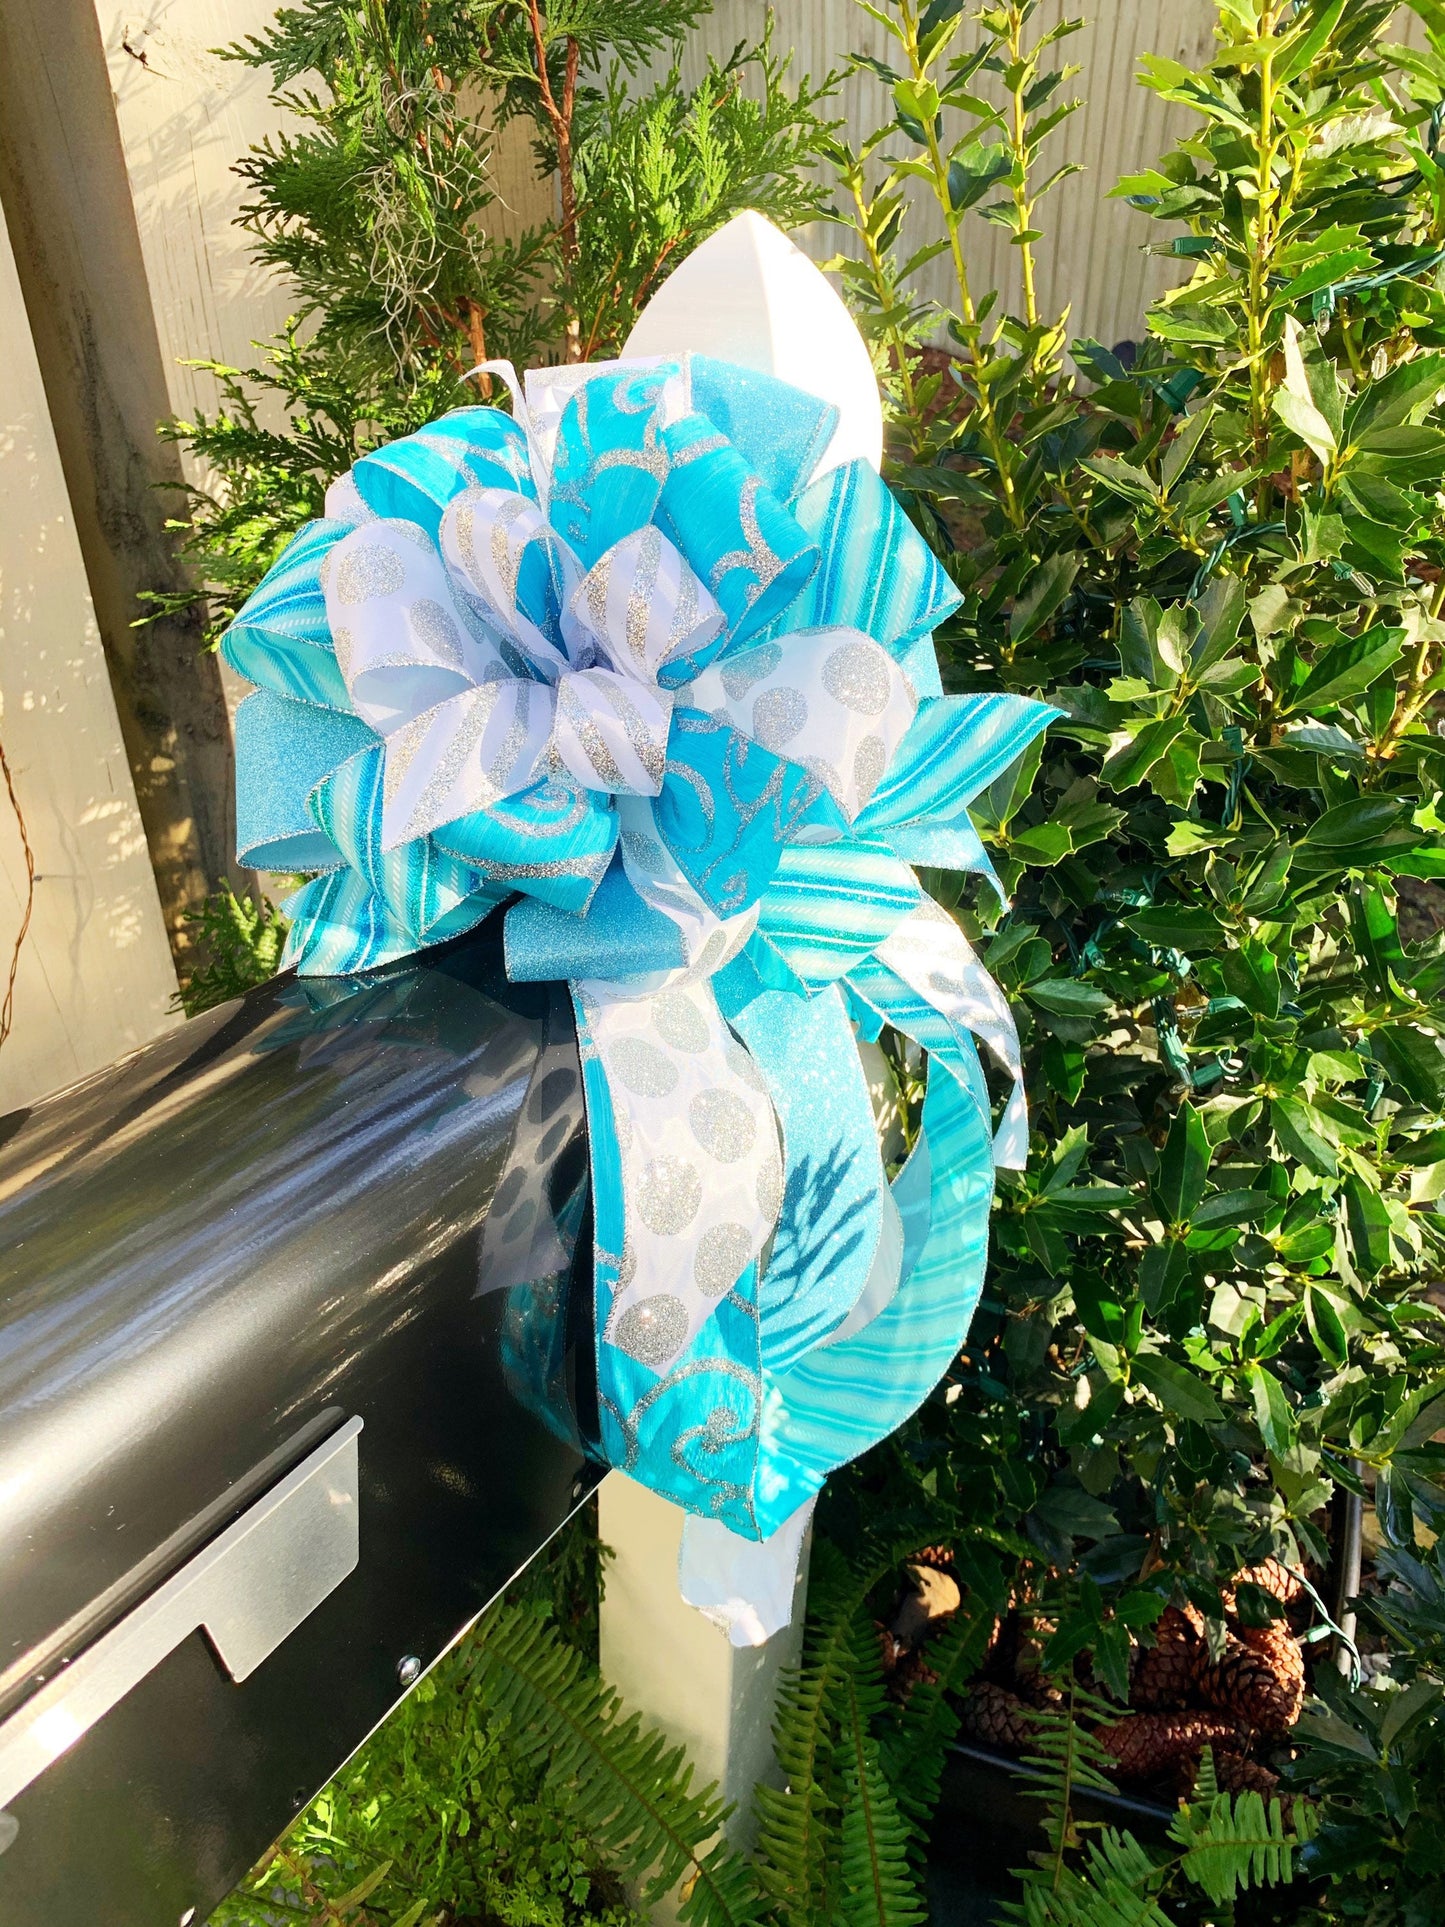 Everyday Collection - Teal Bow, Teal/Silver Bow, Mailbox Bow, Wreath Bow, Silver Bow, Large Bow, Bows, Bow, Gift Bow, Gift